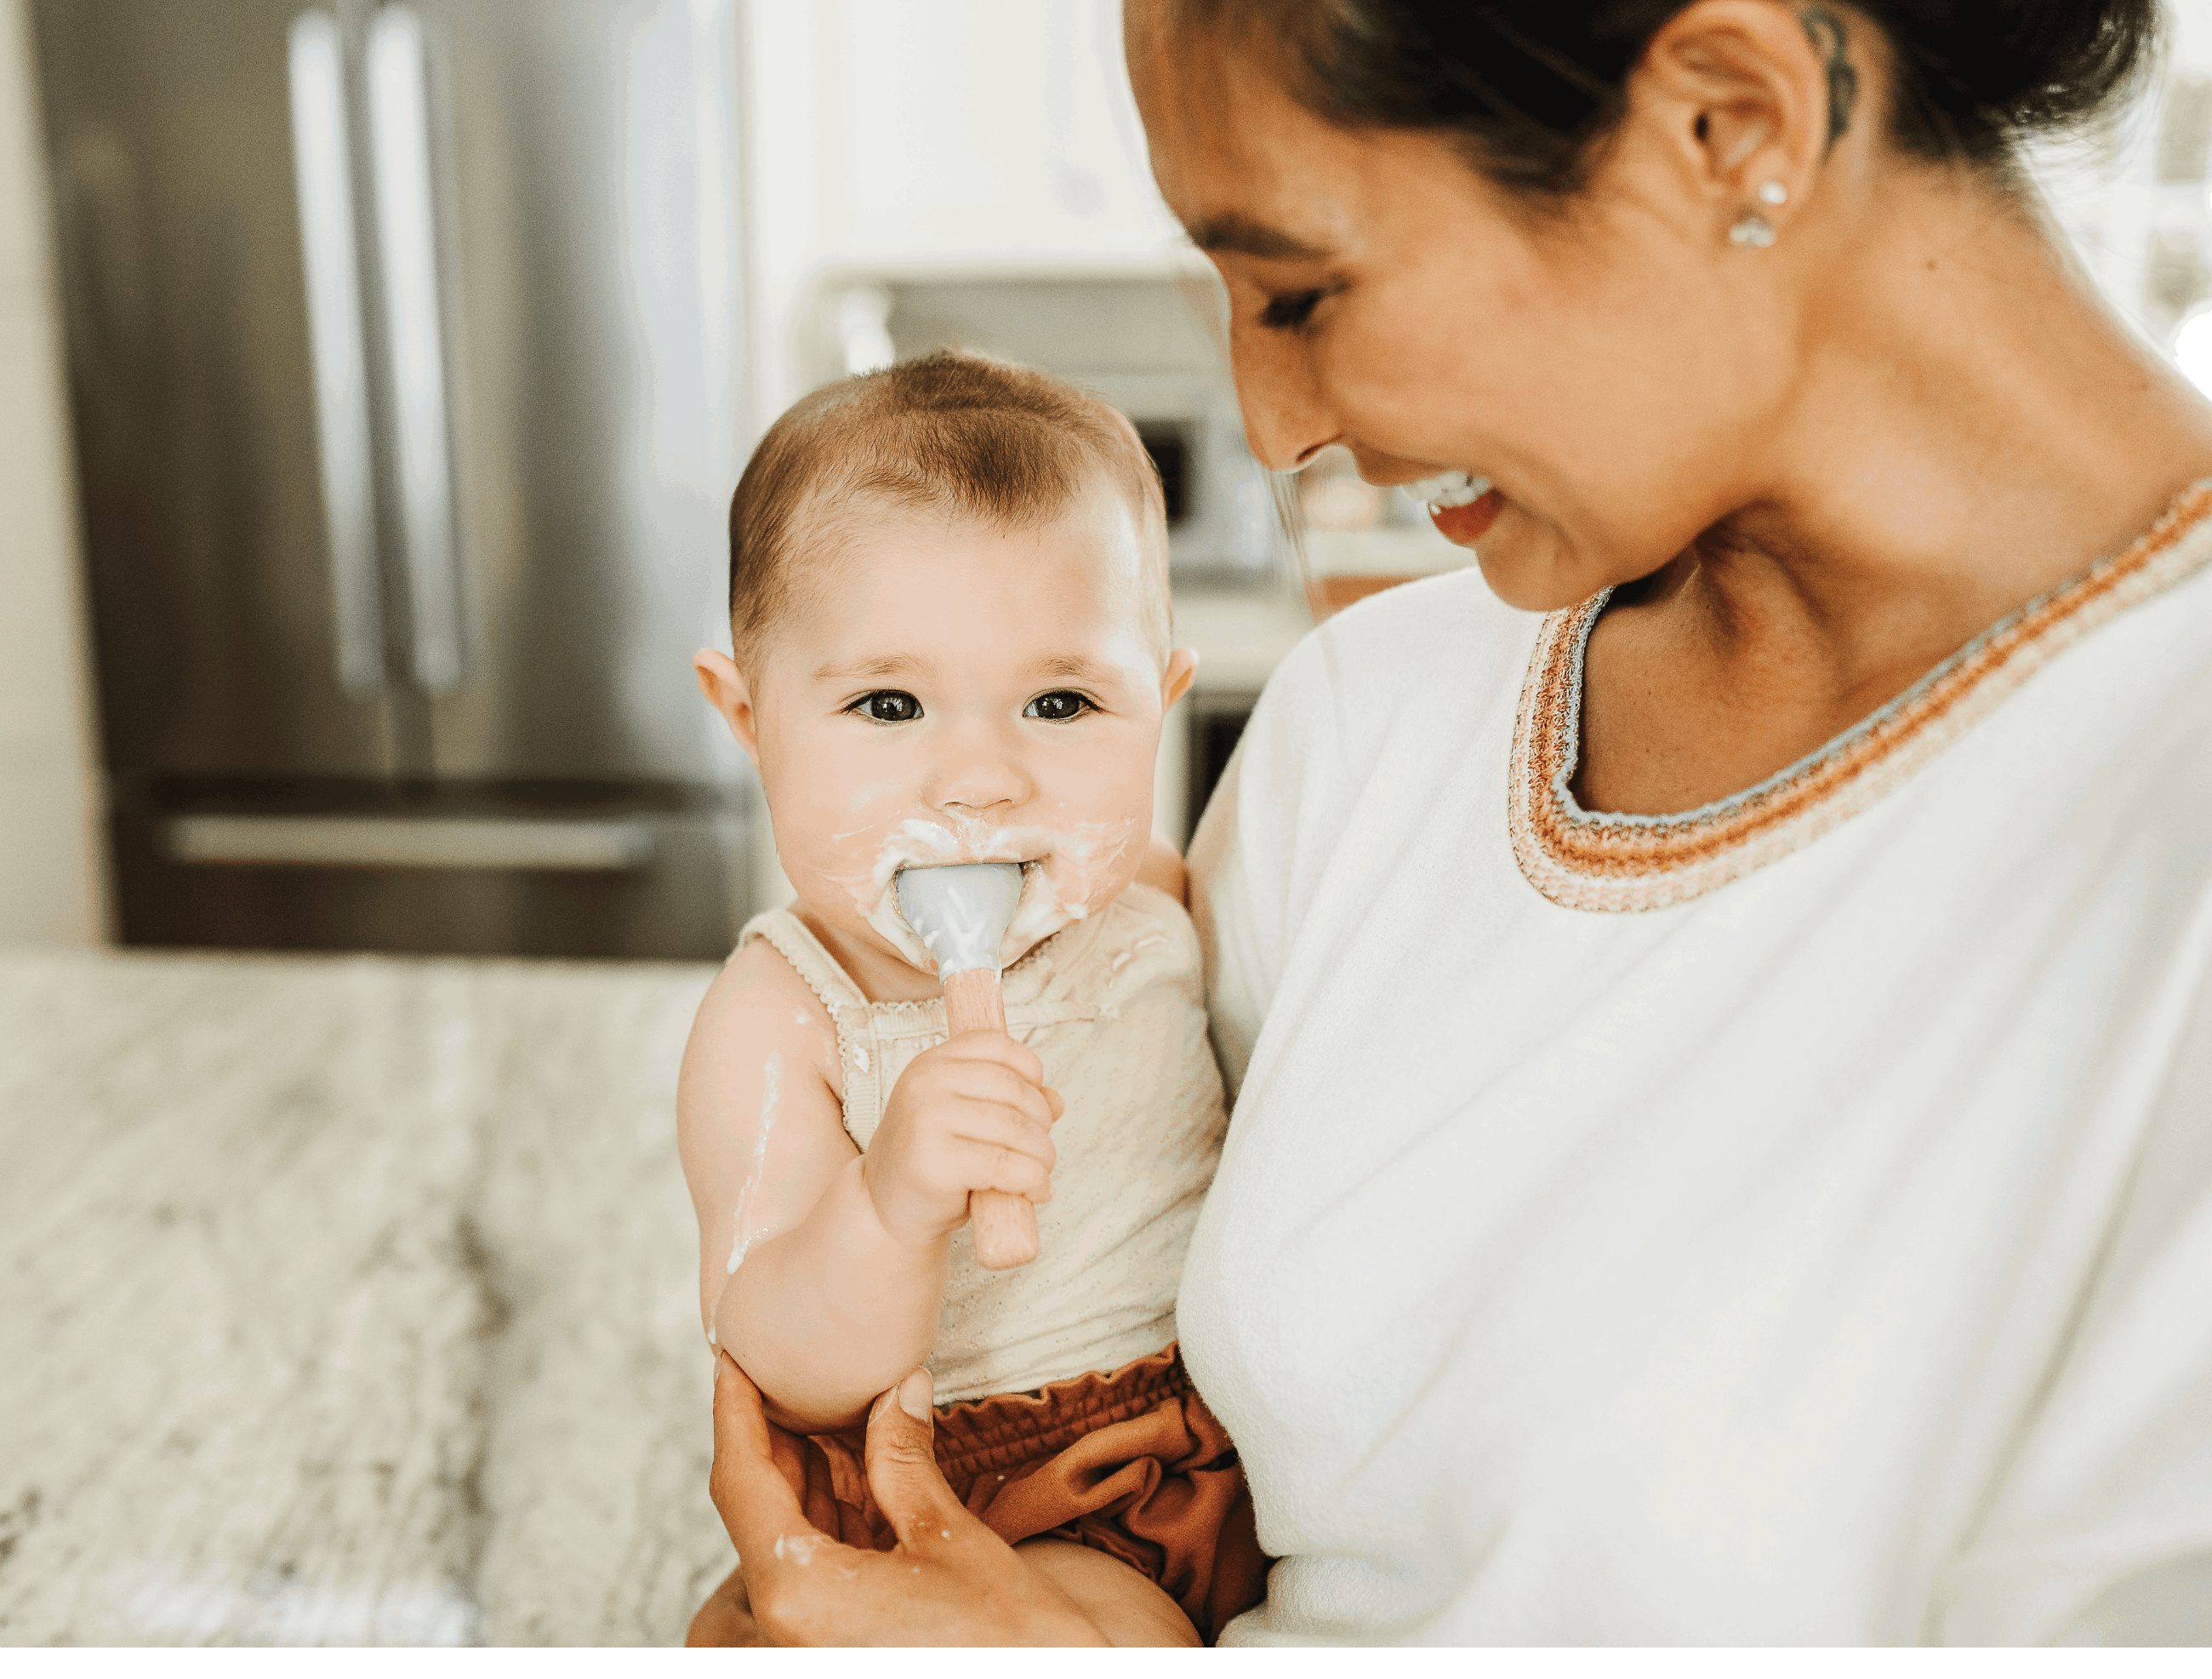 5 Foods To Always Have On Hand To Feed Baby